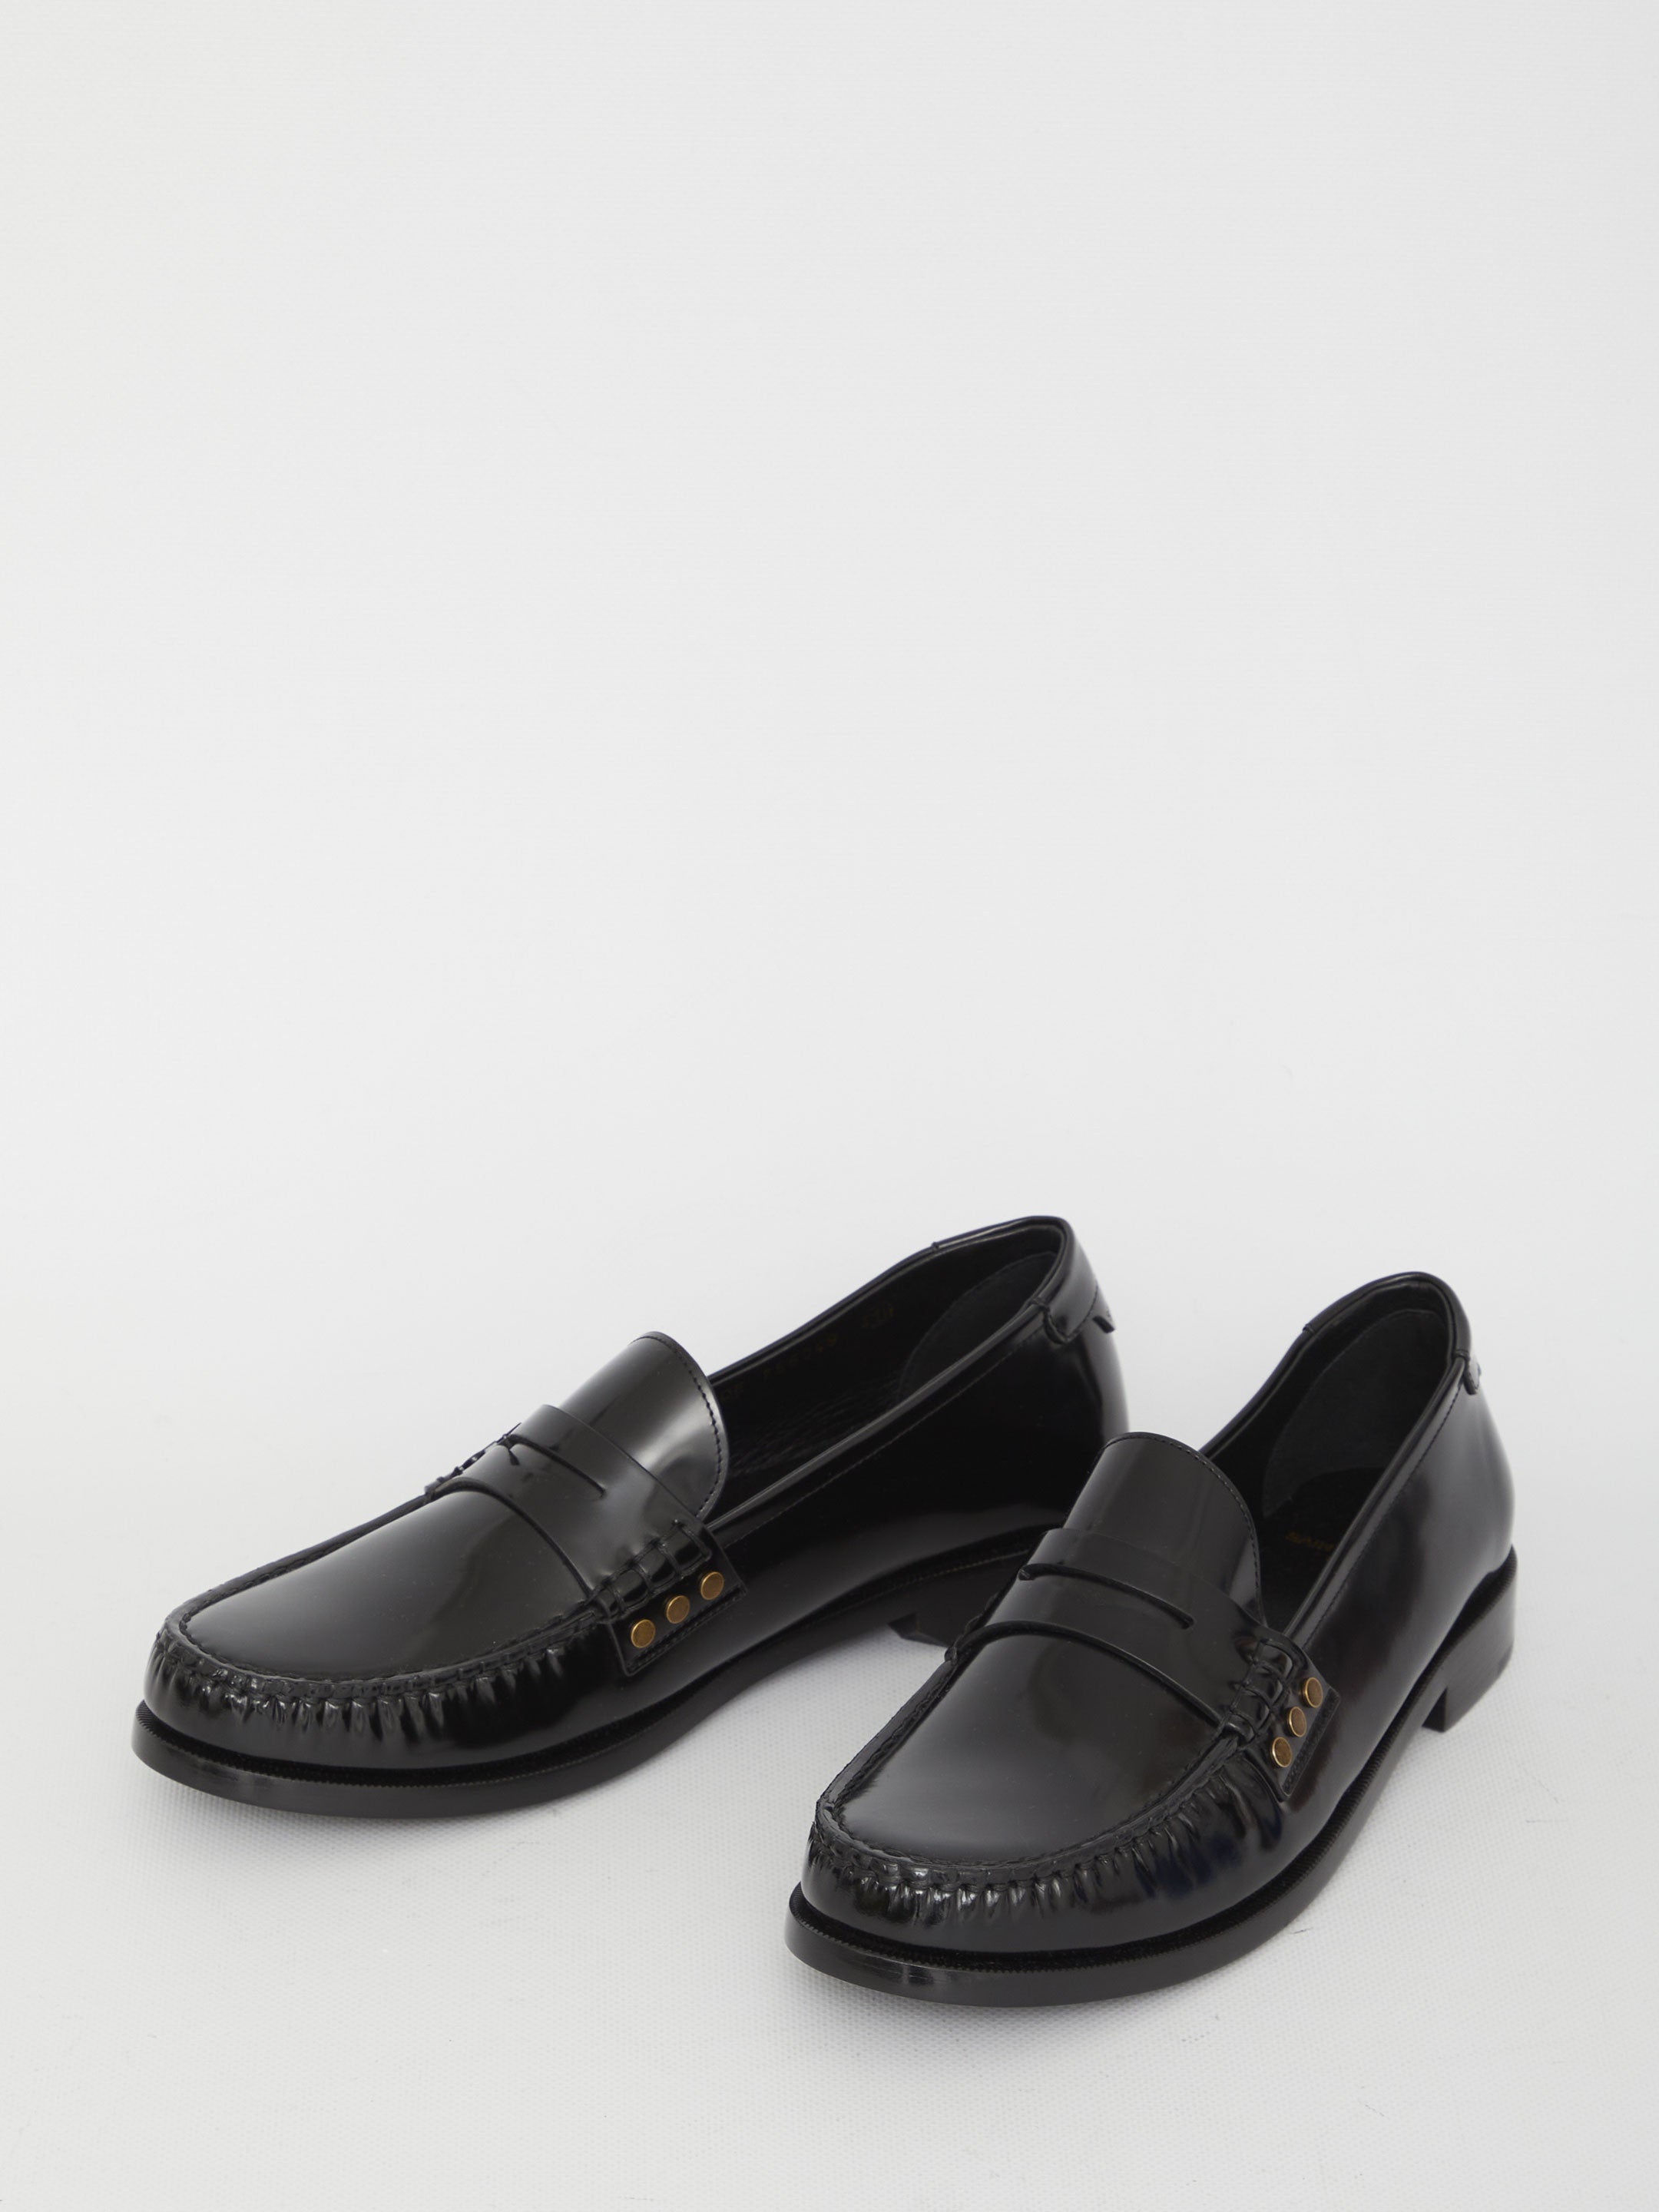 Le Loafer 15 loafers